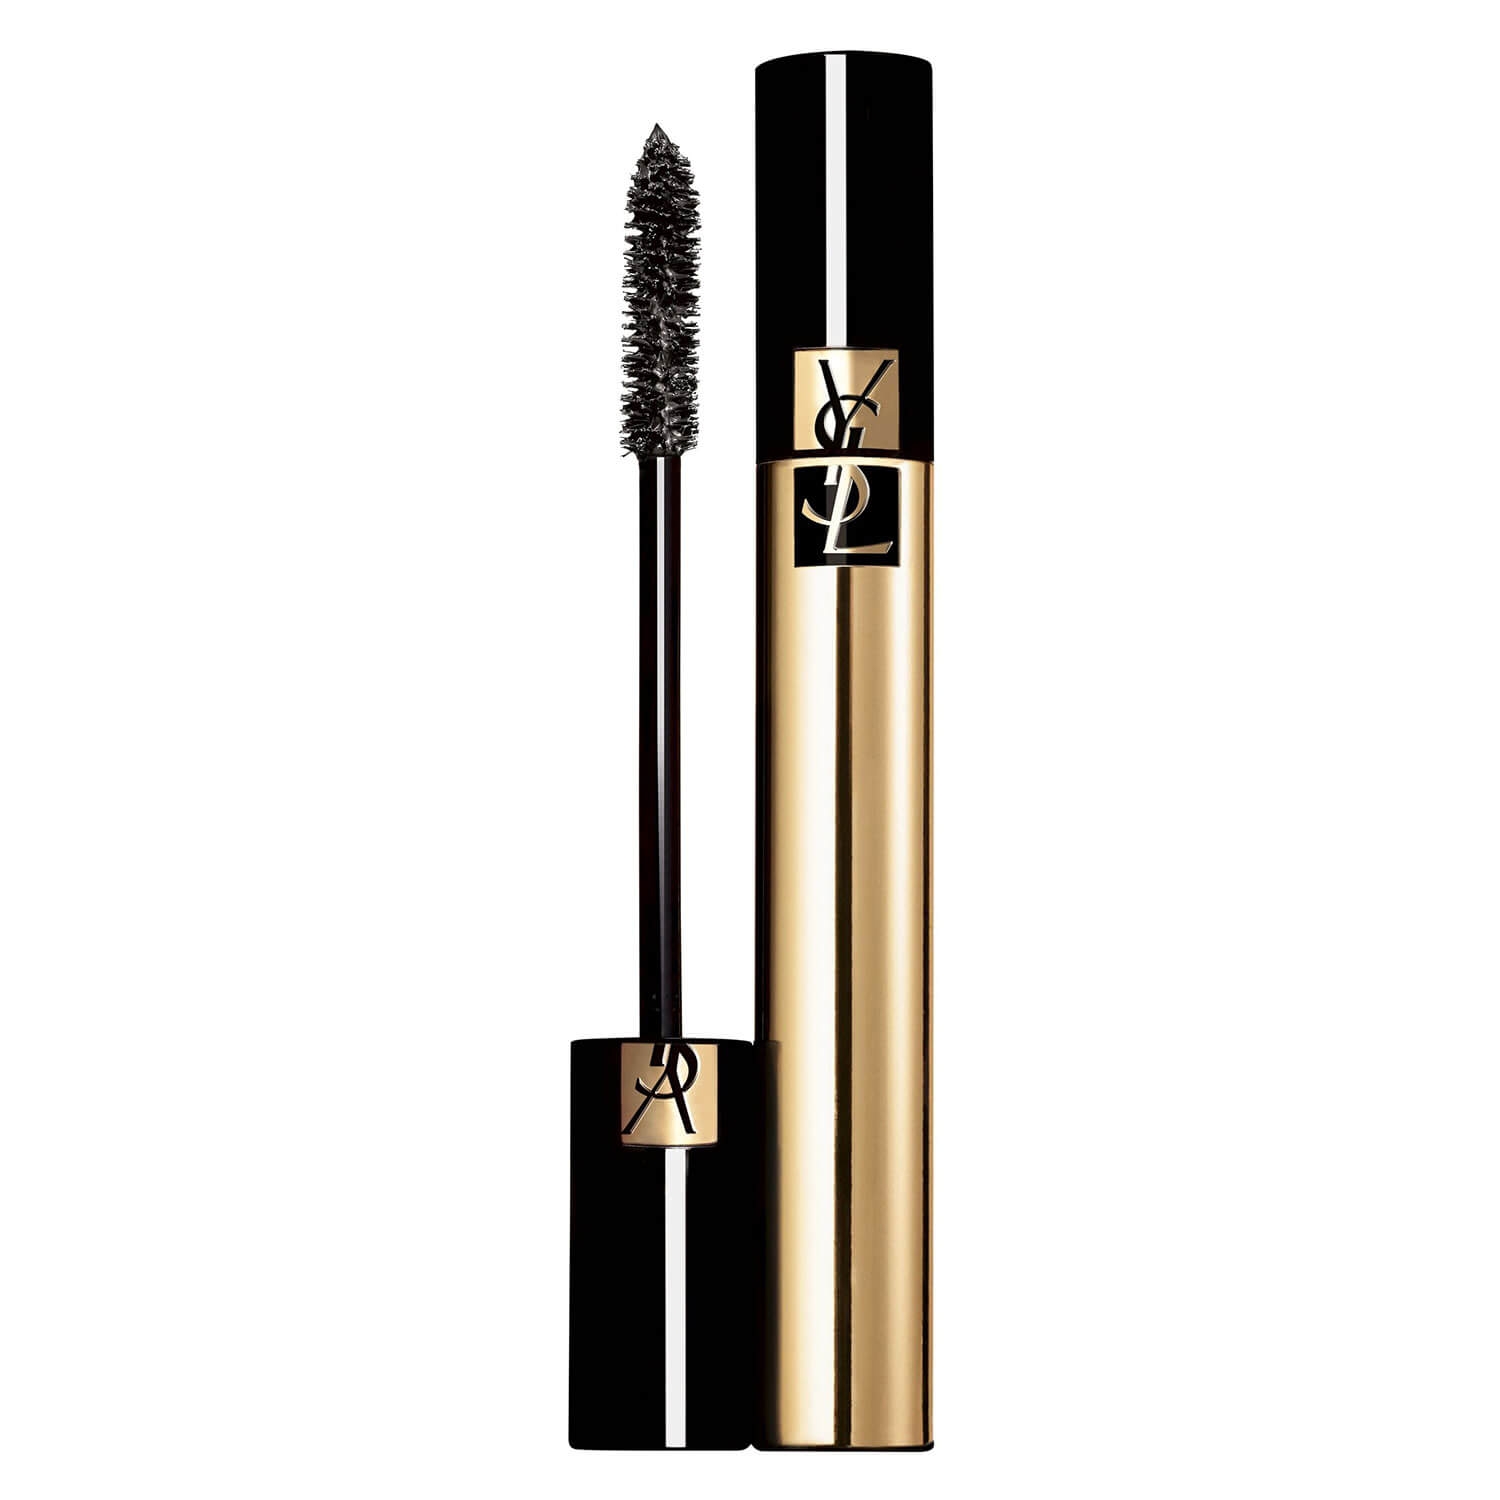 Product image from YSL Mascara - Volume Effet Faux Cils Noir Radical 01